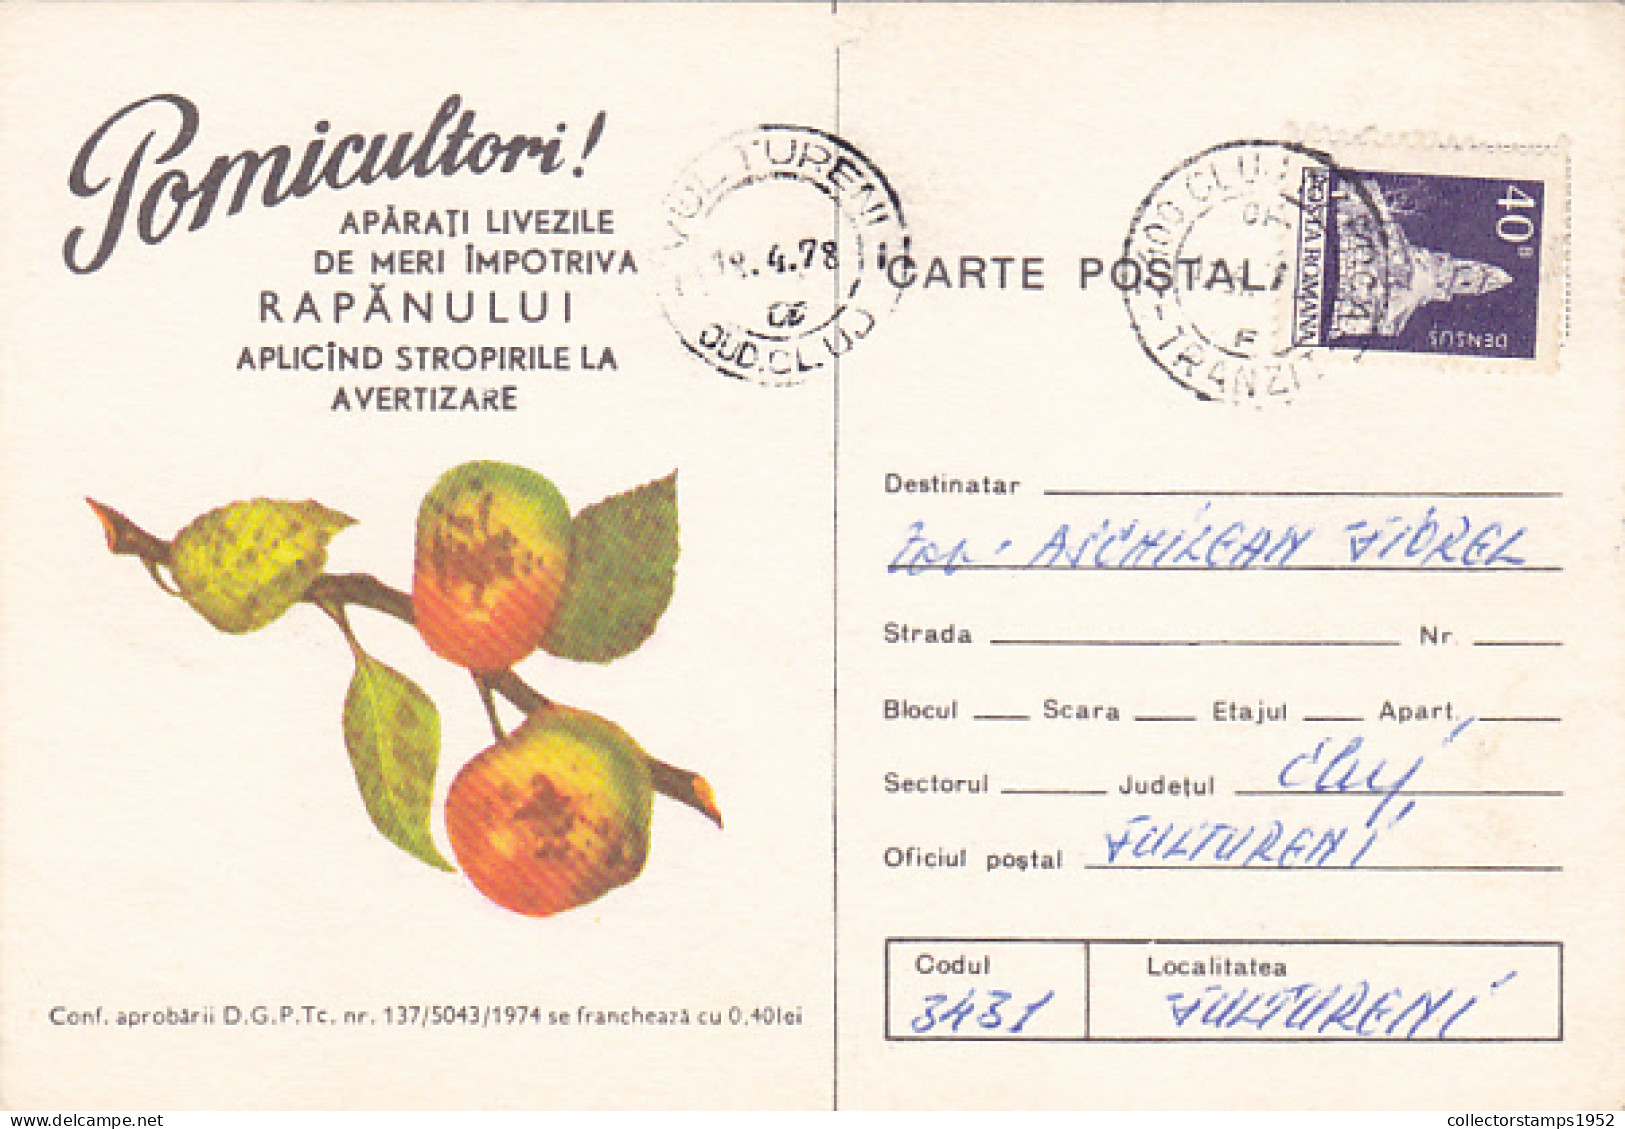 APPLE PESTS ADVERTISING, AGRICULTURE, SPECIAL POSTCARD, 1978, ROMANIA - Agriculture